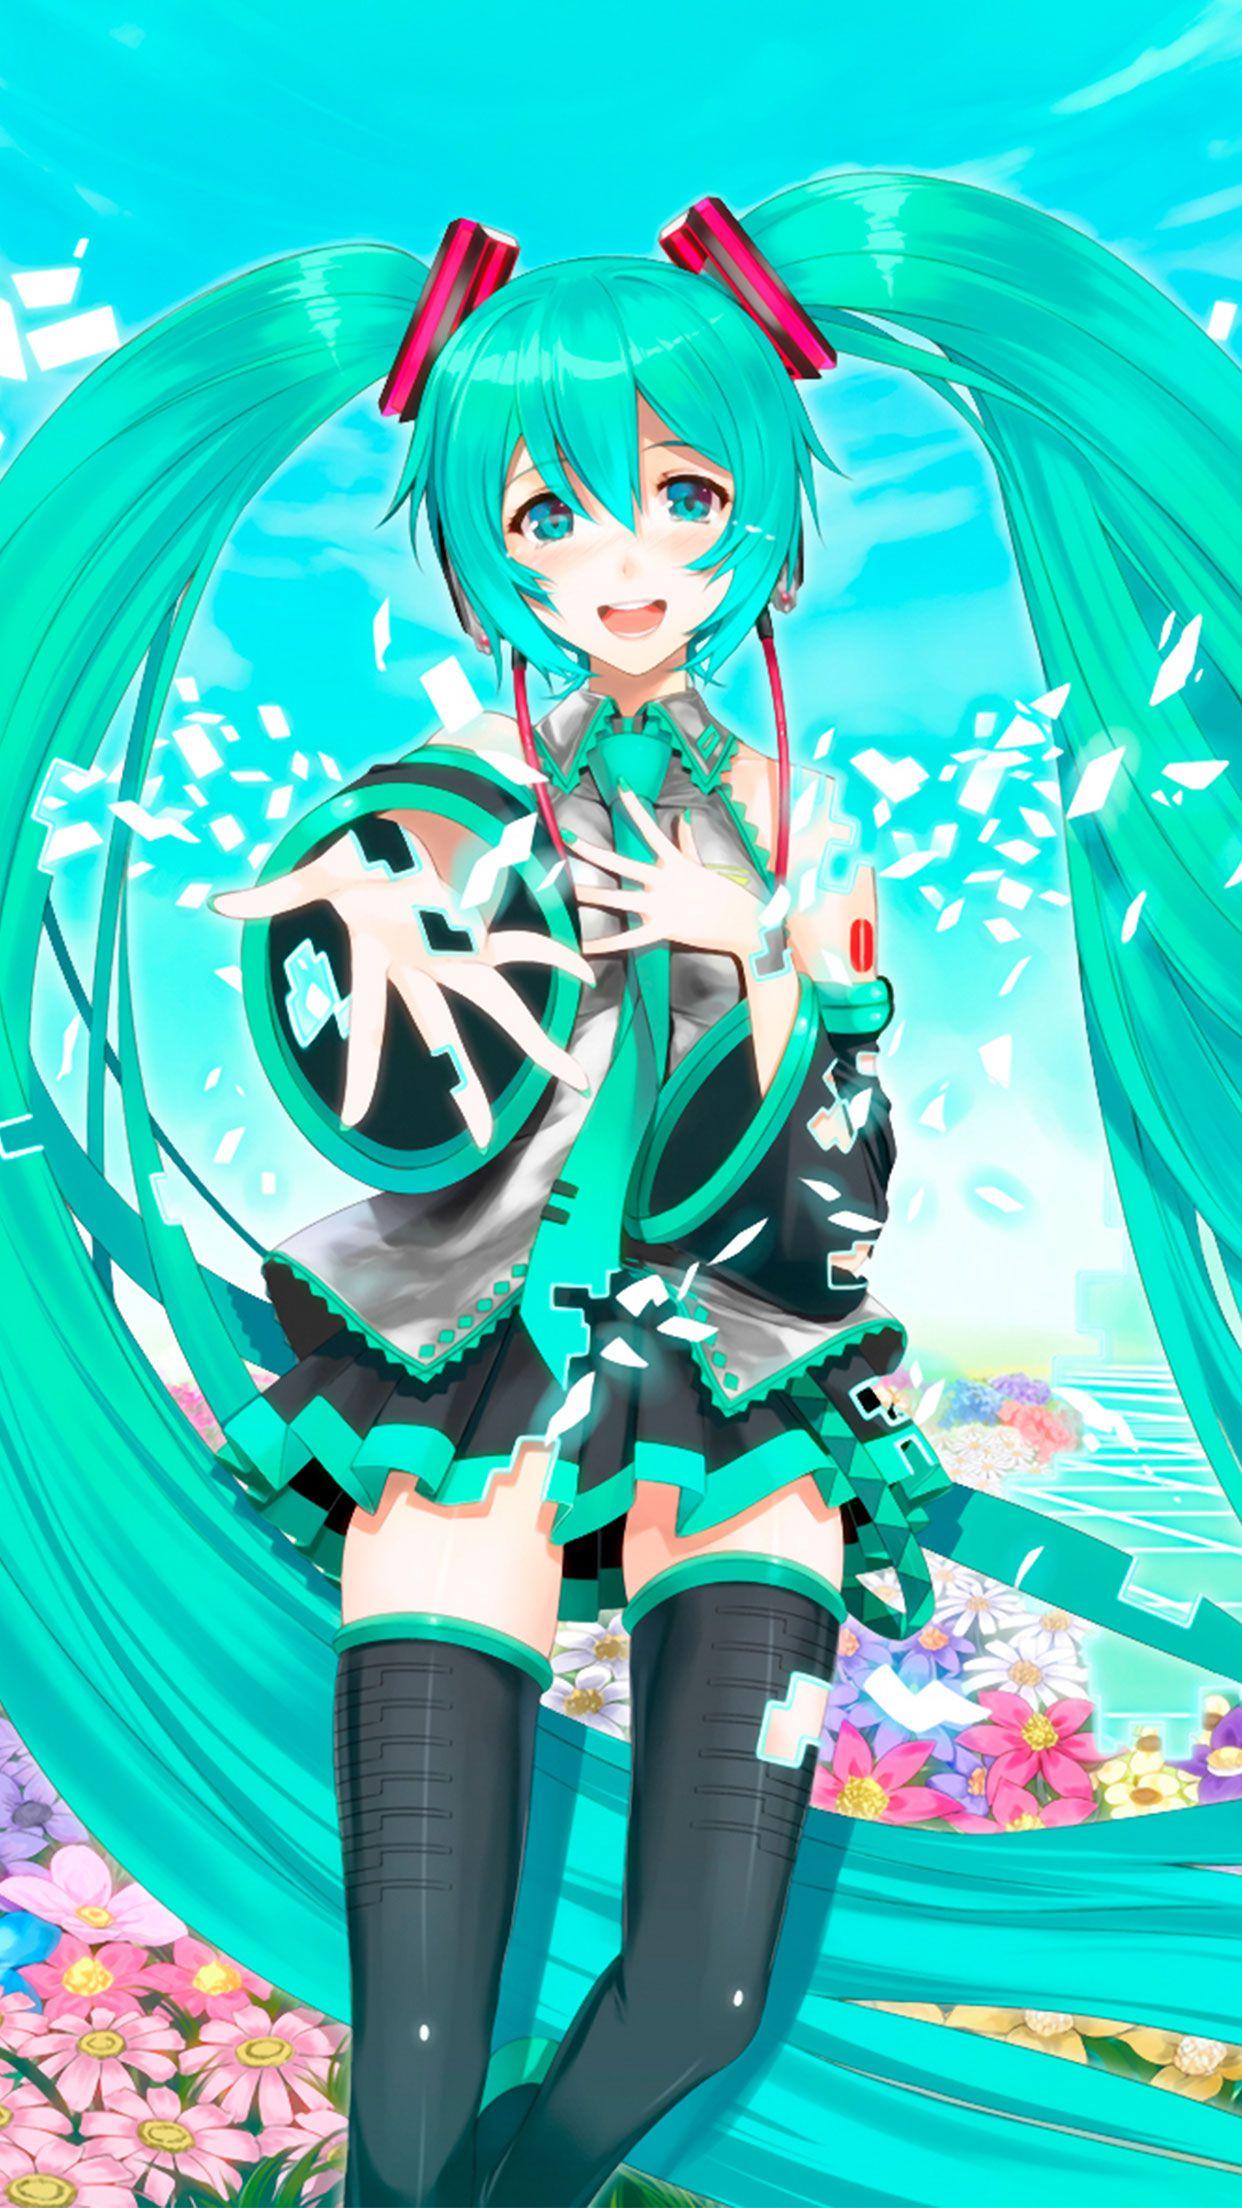 Hatsune Miku anime wallpaper for #iPhone and #Android #hatsune #miku #anime #wallpaper check out more on wallzapp.com. Hatsune, Anime, Hatsune miku